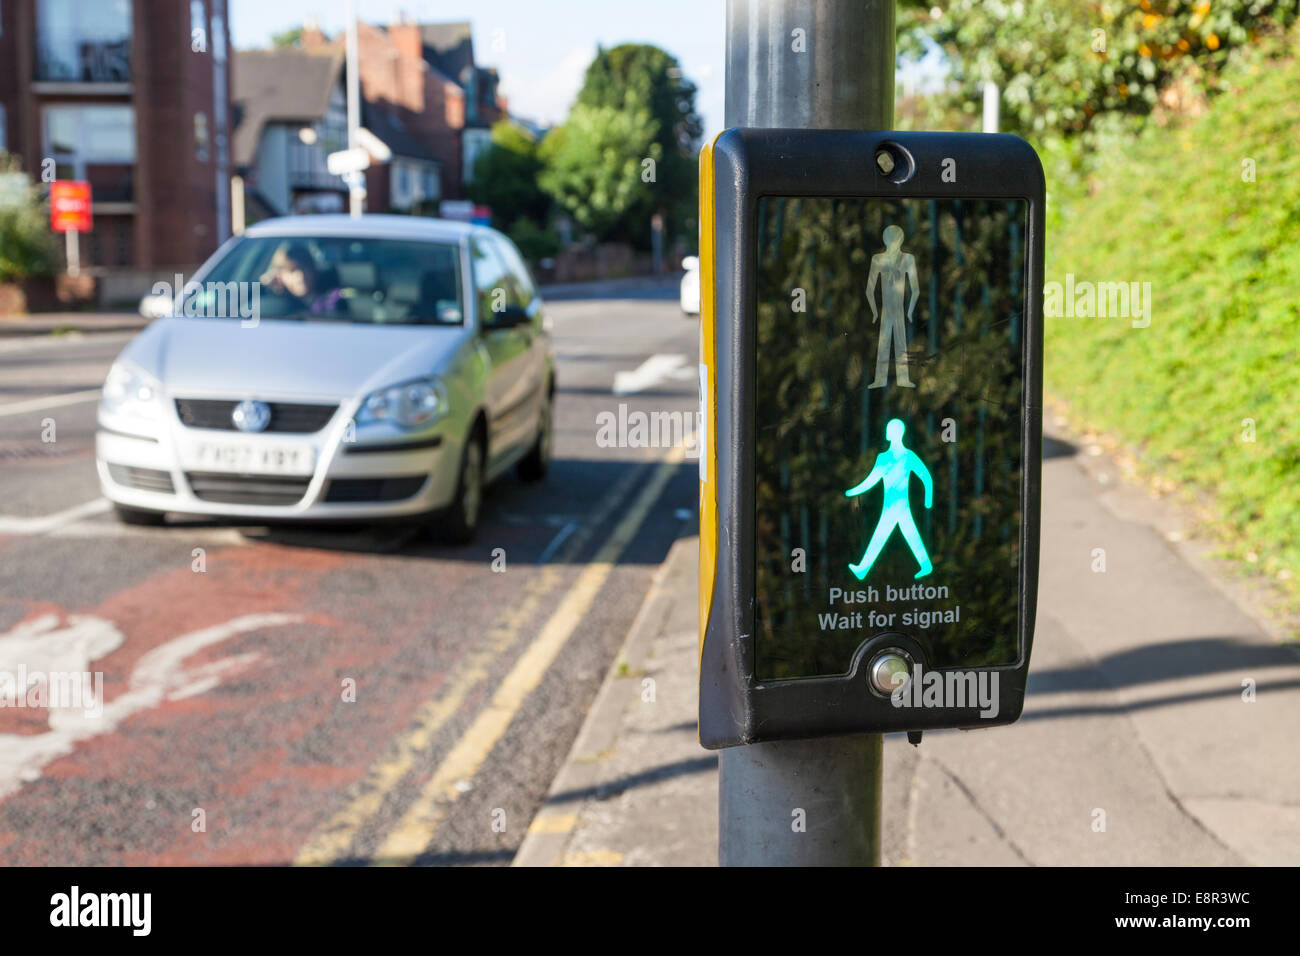 Car waiting at a puffin pedestrian crossing with the control showing an illuminated green man sign, Nottinghamshire, England, UK Stock Photo